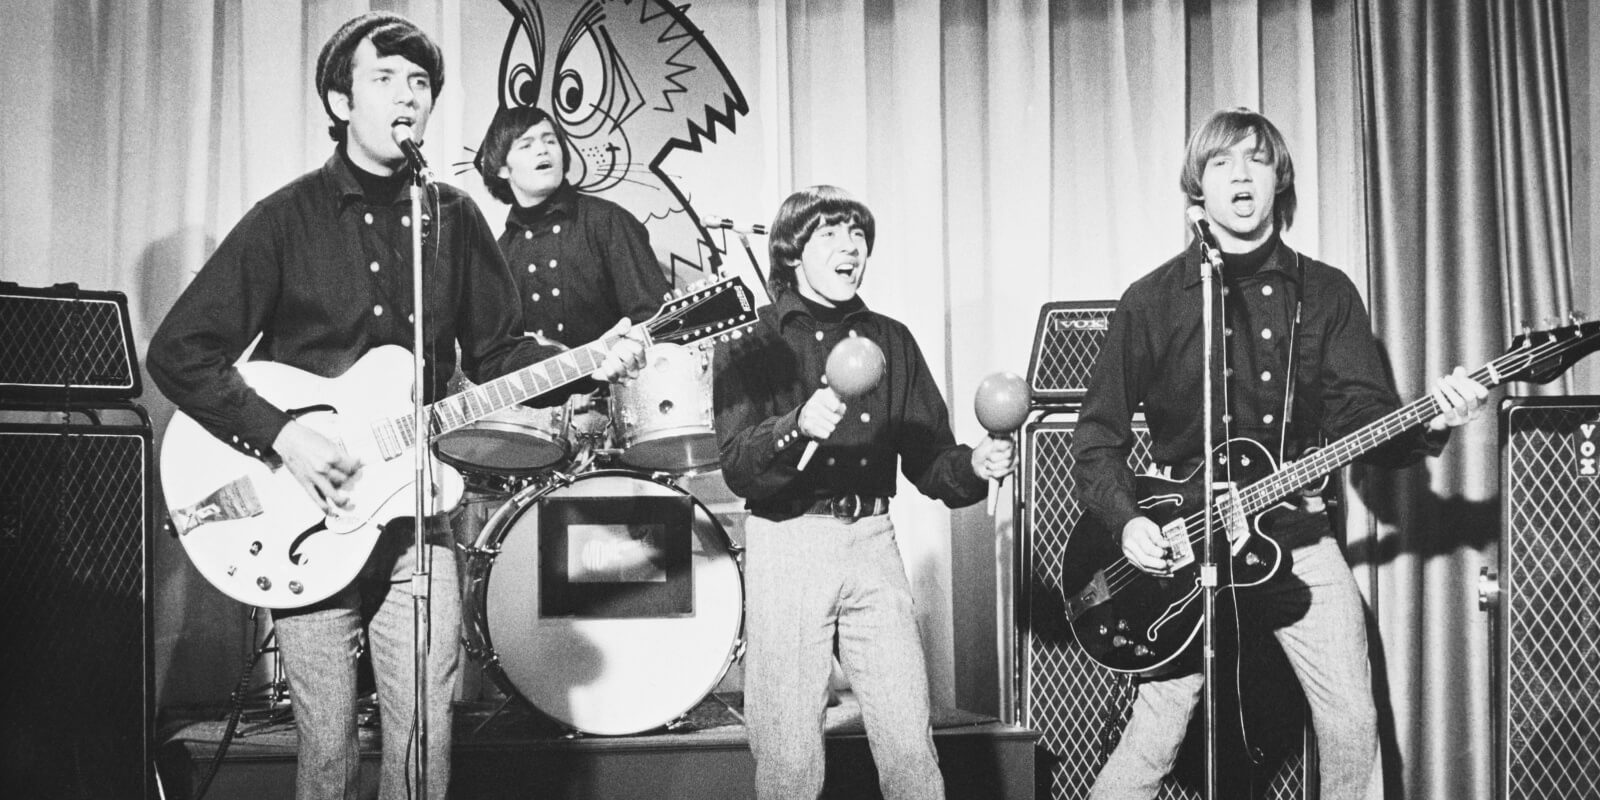 The Monkees Micky Dolenz along with Mike Nesmith, Davy Jones and Peter Tork on the set of their television show.